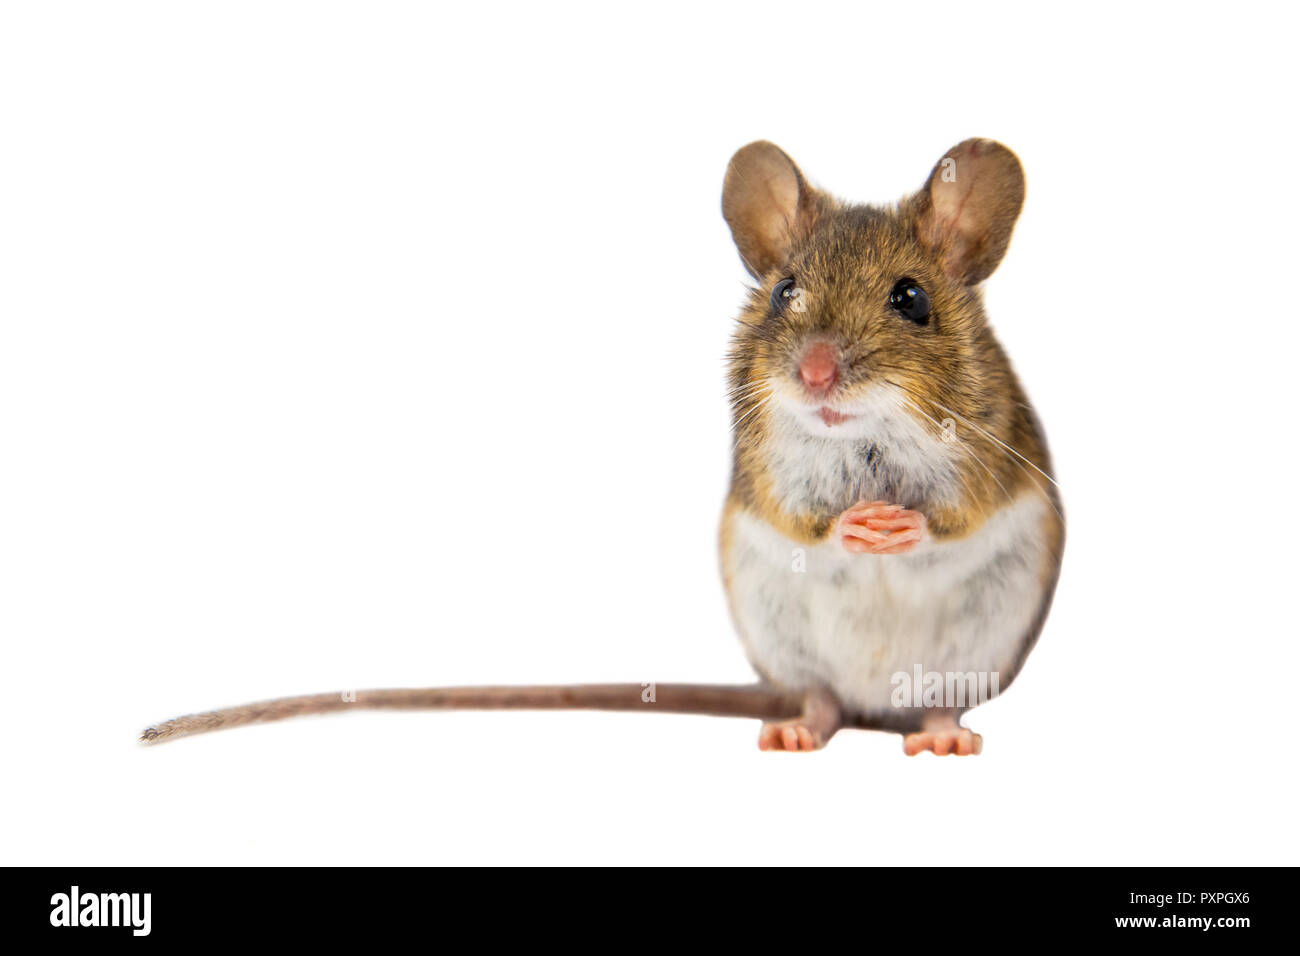 Wood mouse (Apodemus sylvaticus) sitting patiently on hind legs and looking in the camera on white background Stock Photo